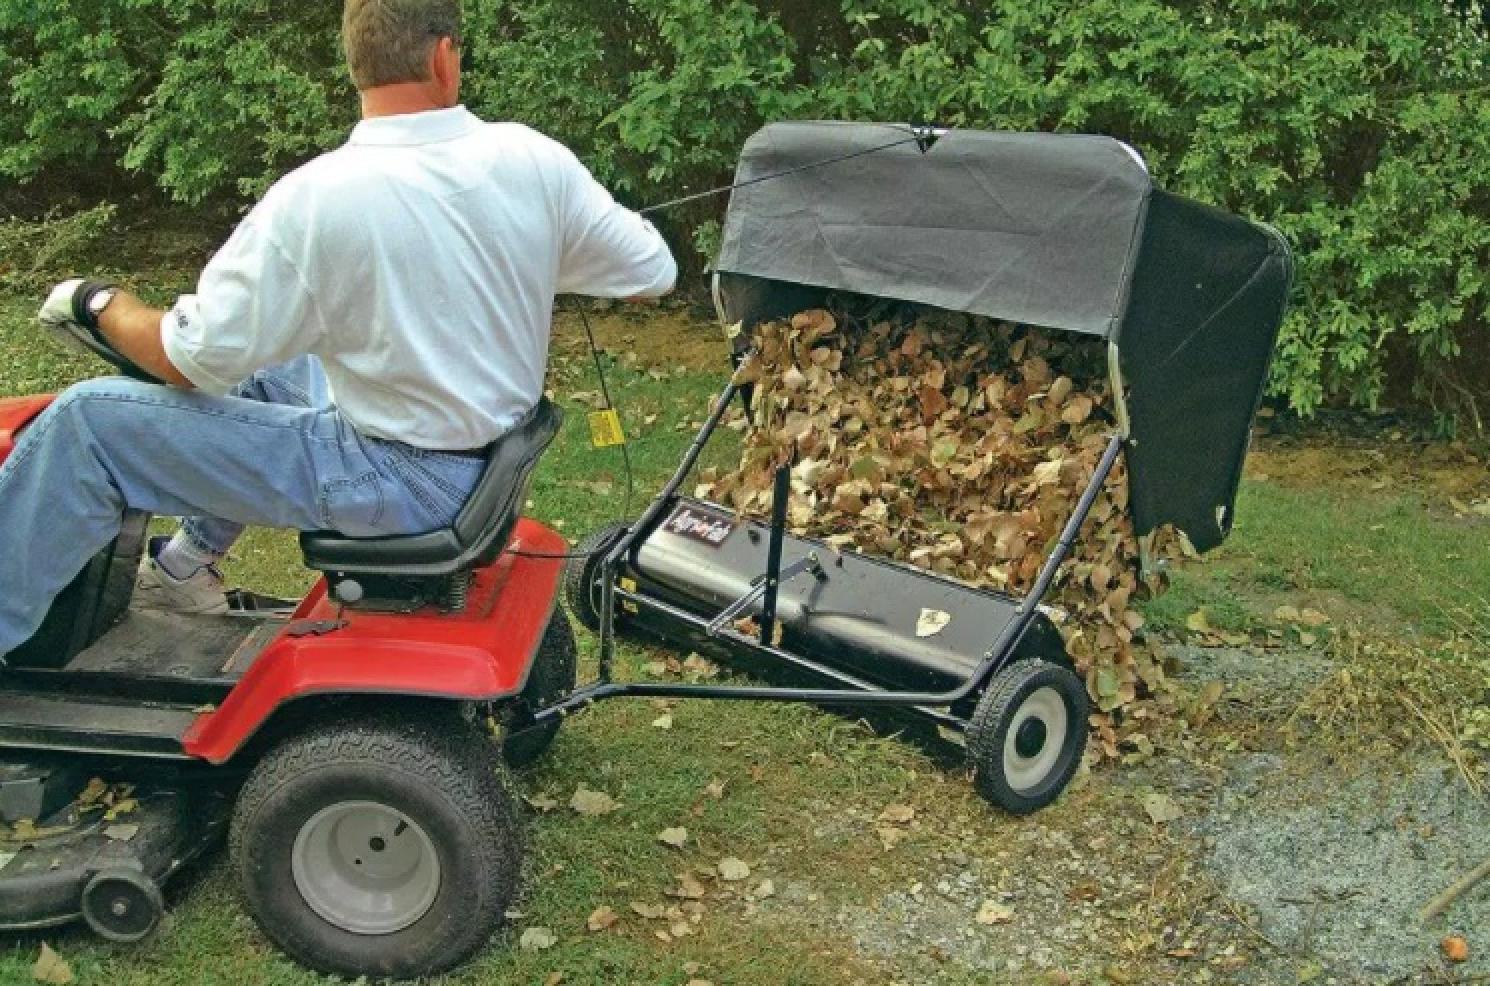 Agri-Fab Tow Lawn Sweeper